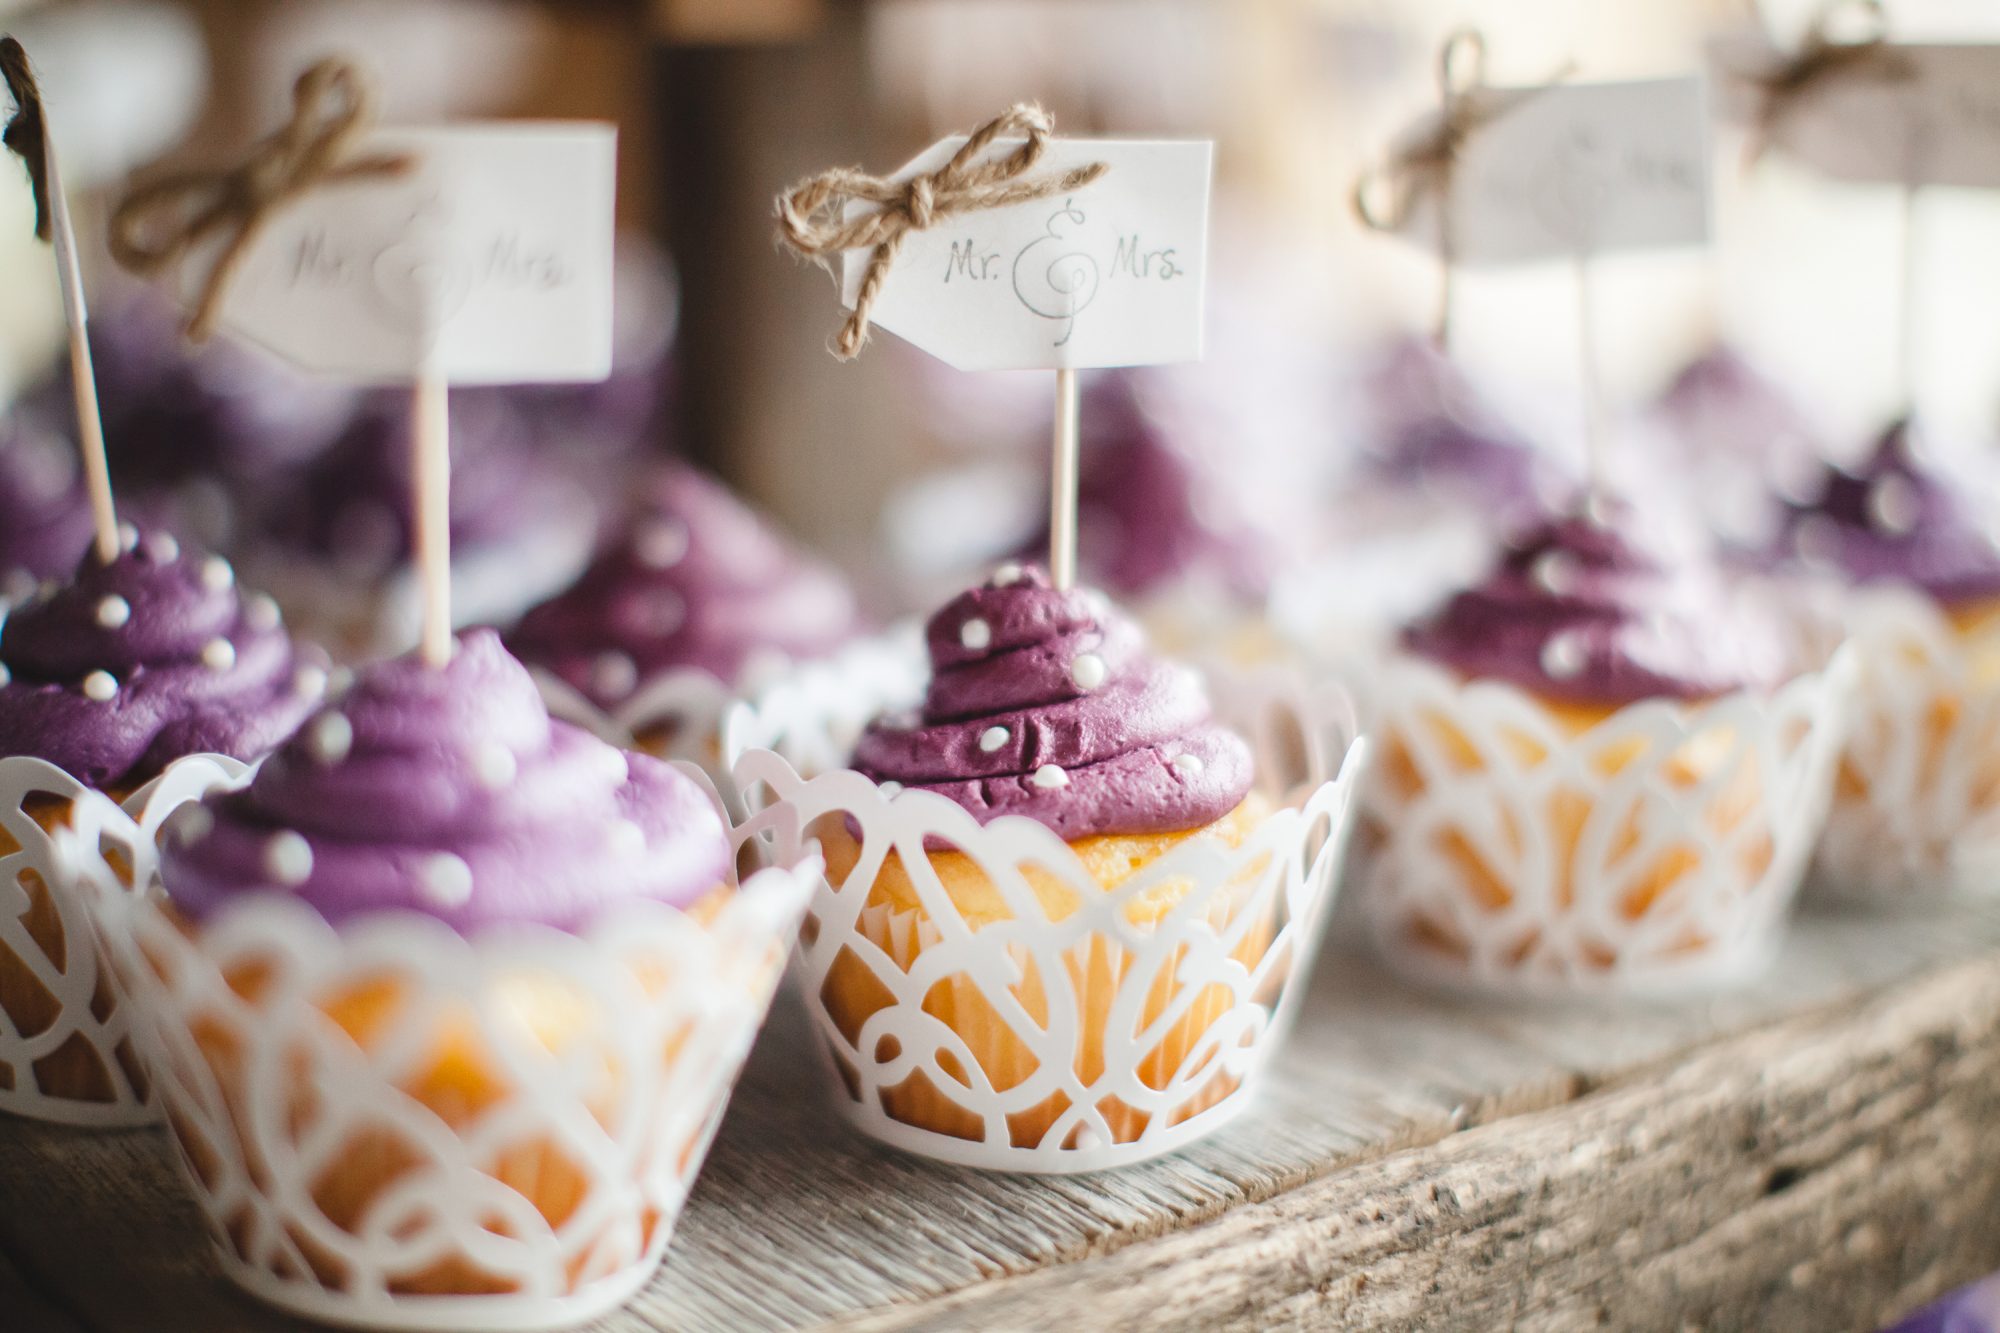 White cupcakes with purple frosting and white polka dots for weddings